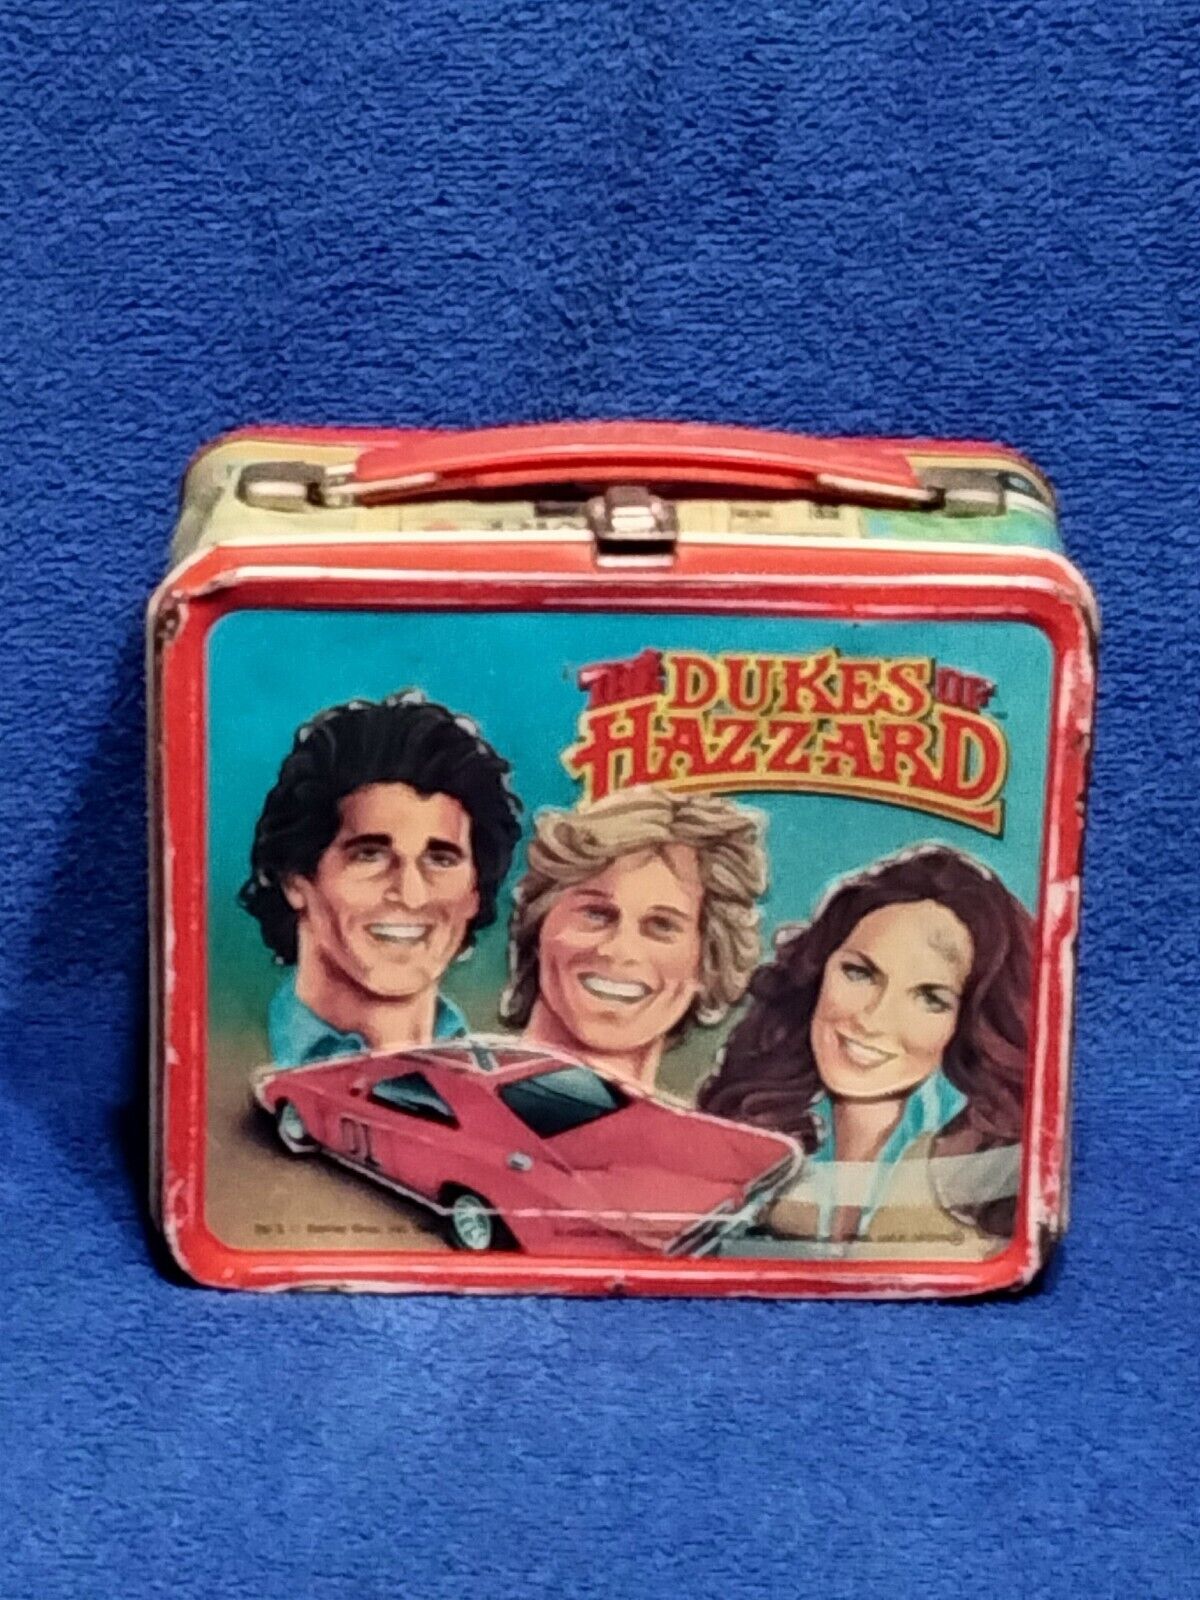 Vintage 1983 Dukes of Hazzard COY & VANCE Lunchbox Aladdin NO Thermos